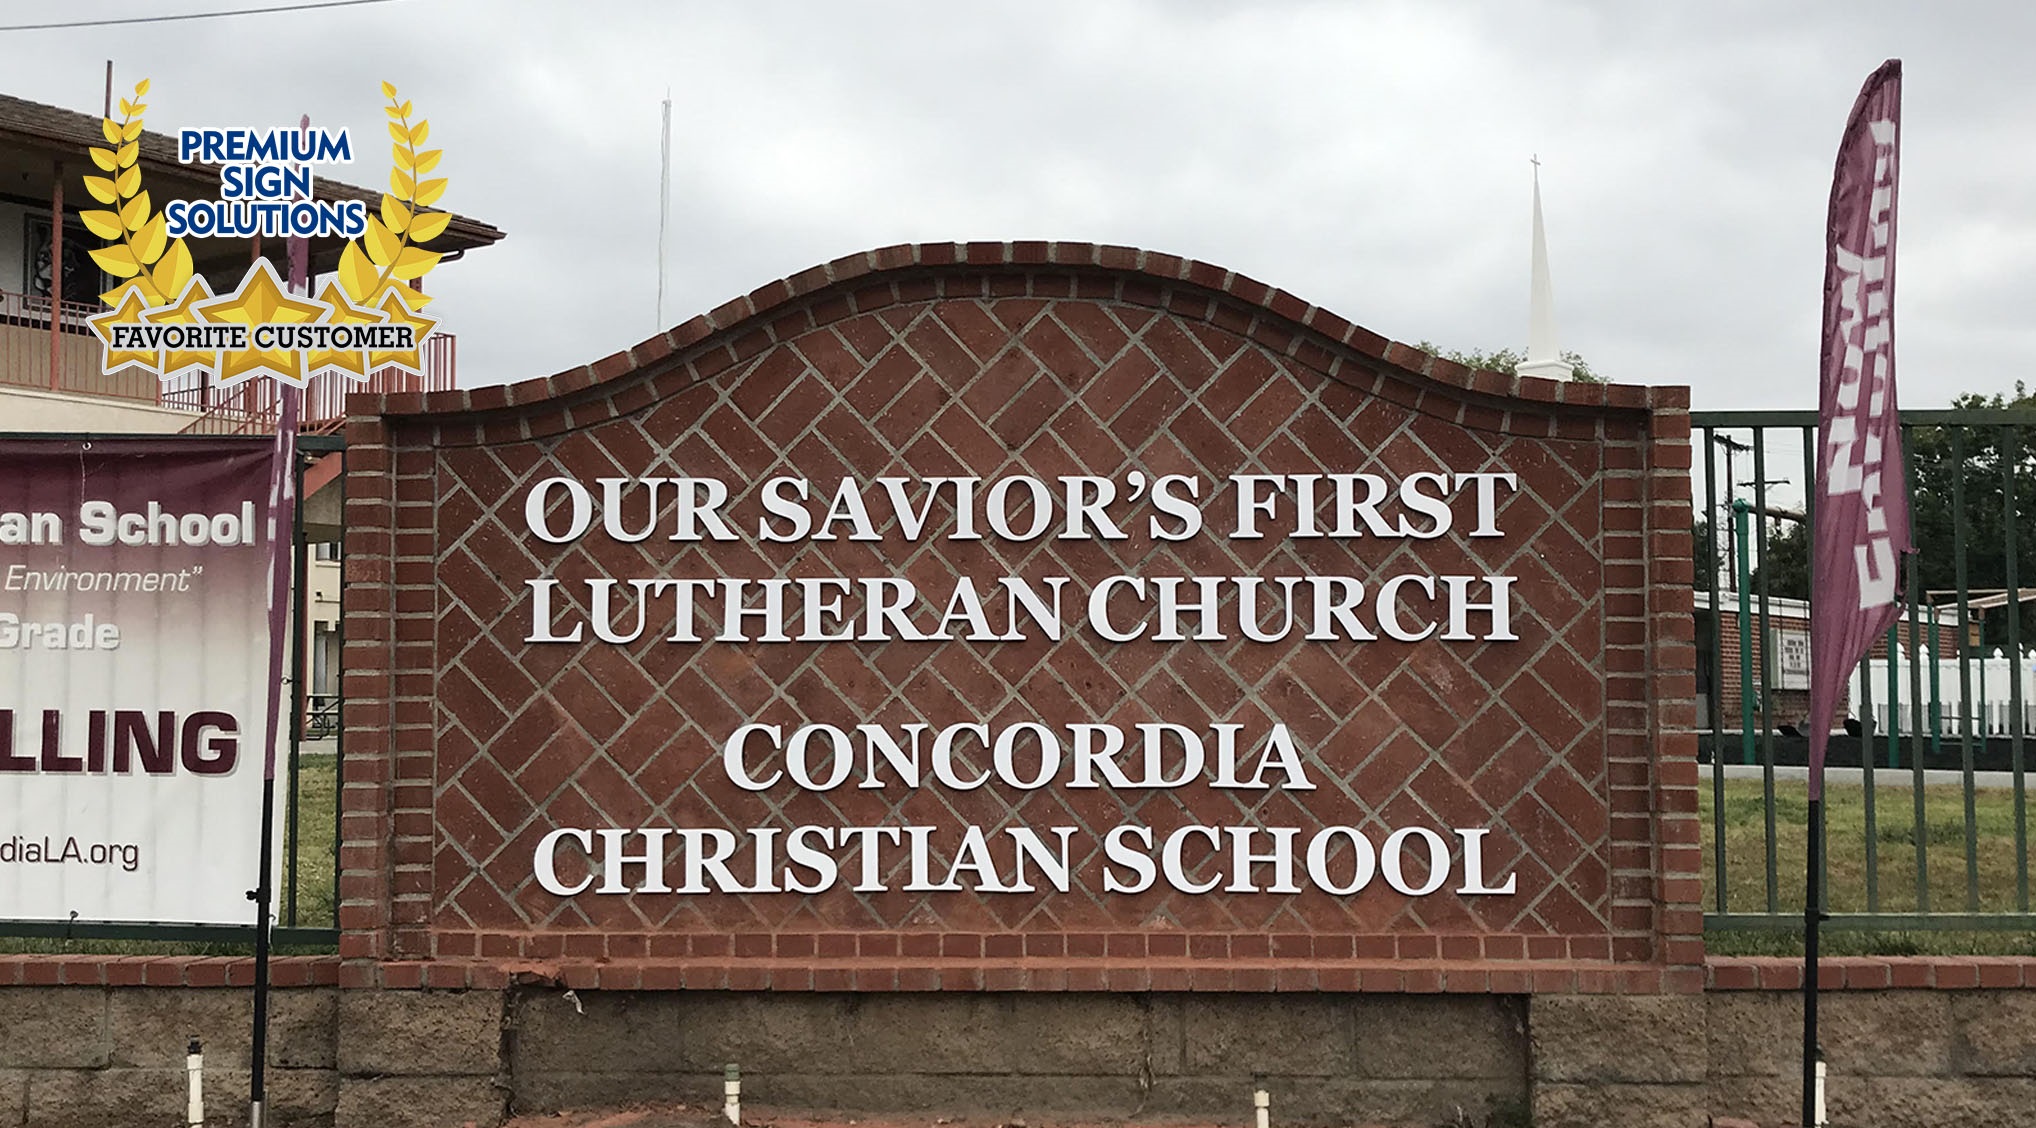 You are currently viewing Our Favorite Customers: Concordia Christian School in Granada Hills